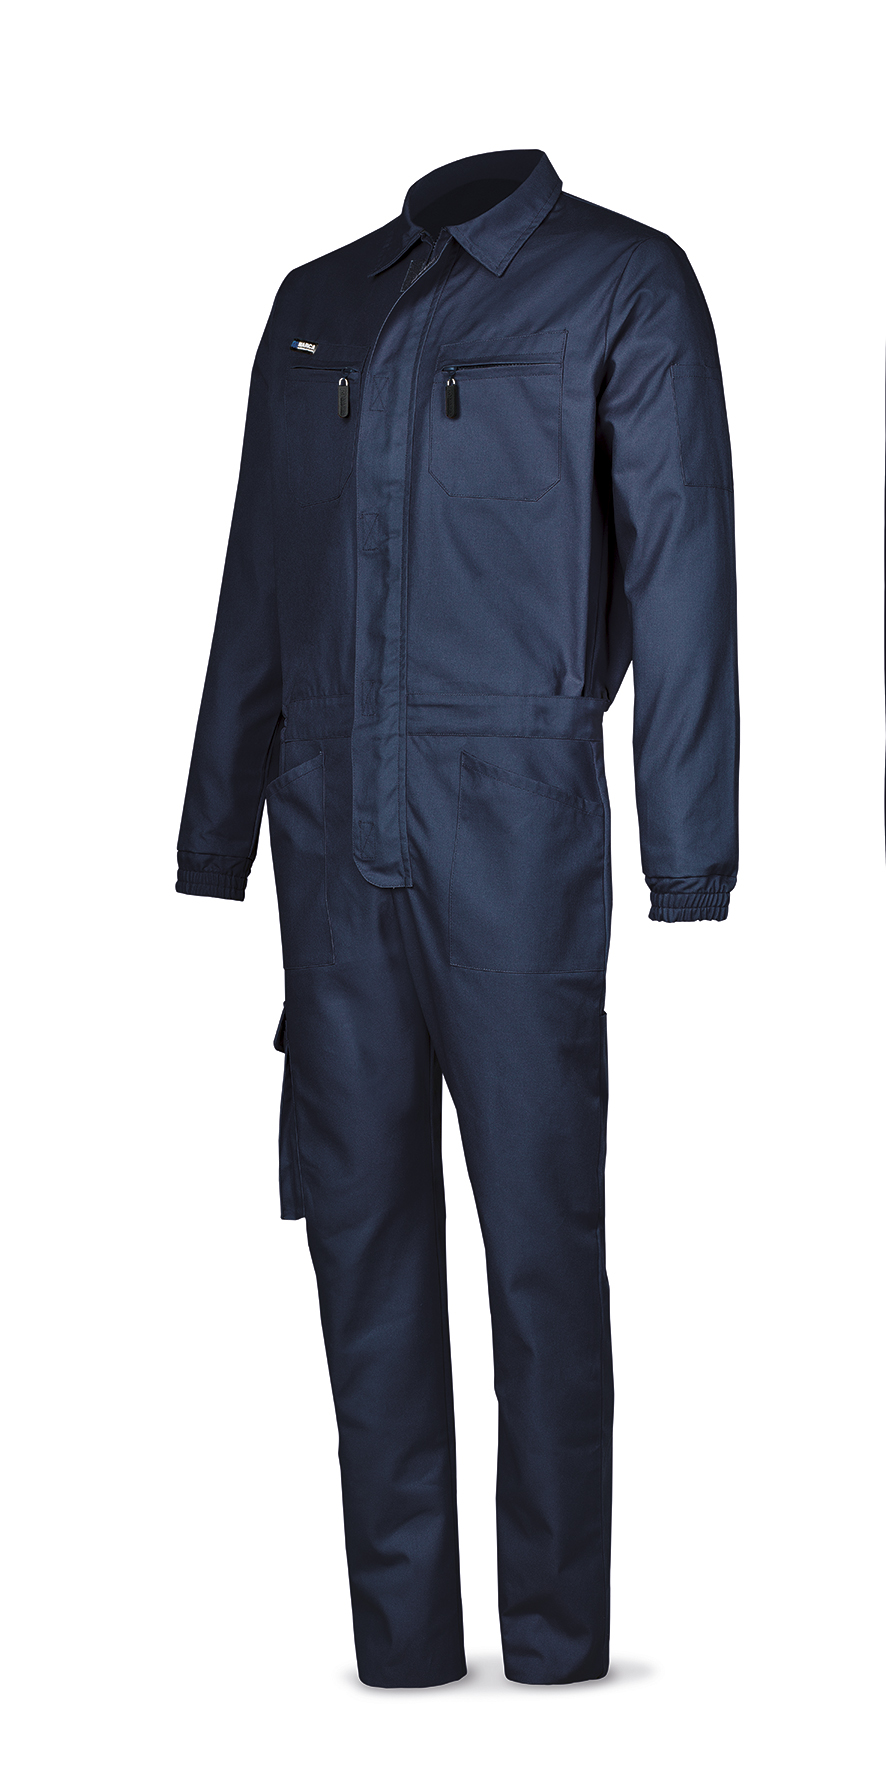 488-BA Top Workwear Top Series Overall 100% Cotton. Navy blue.